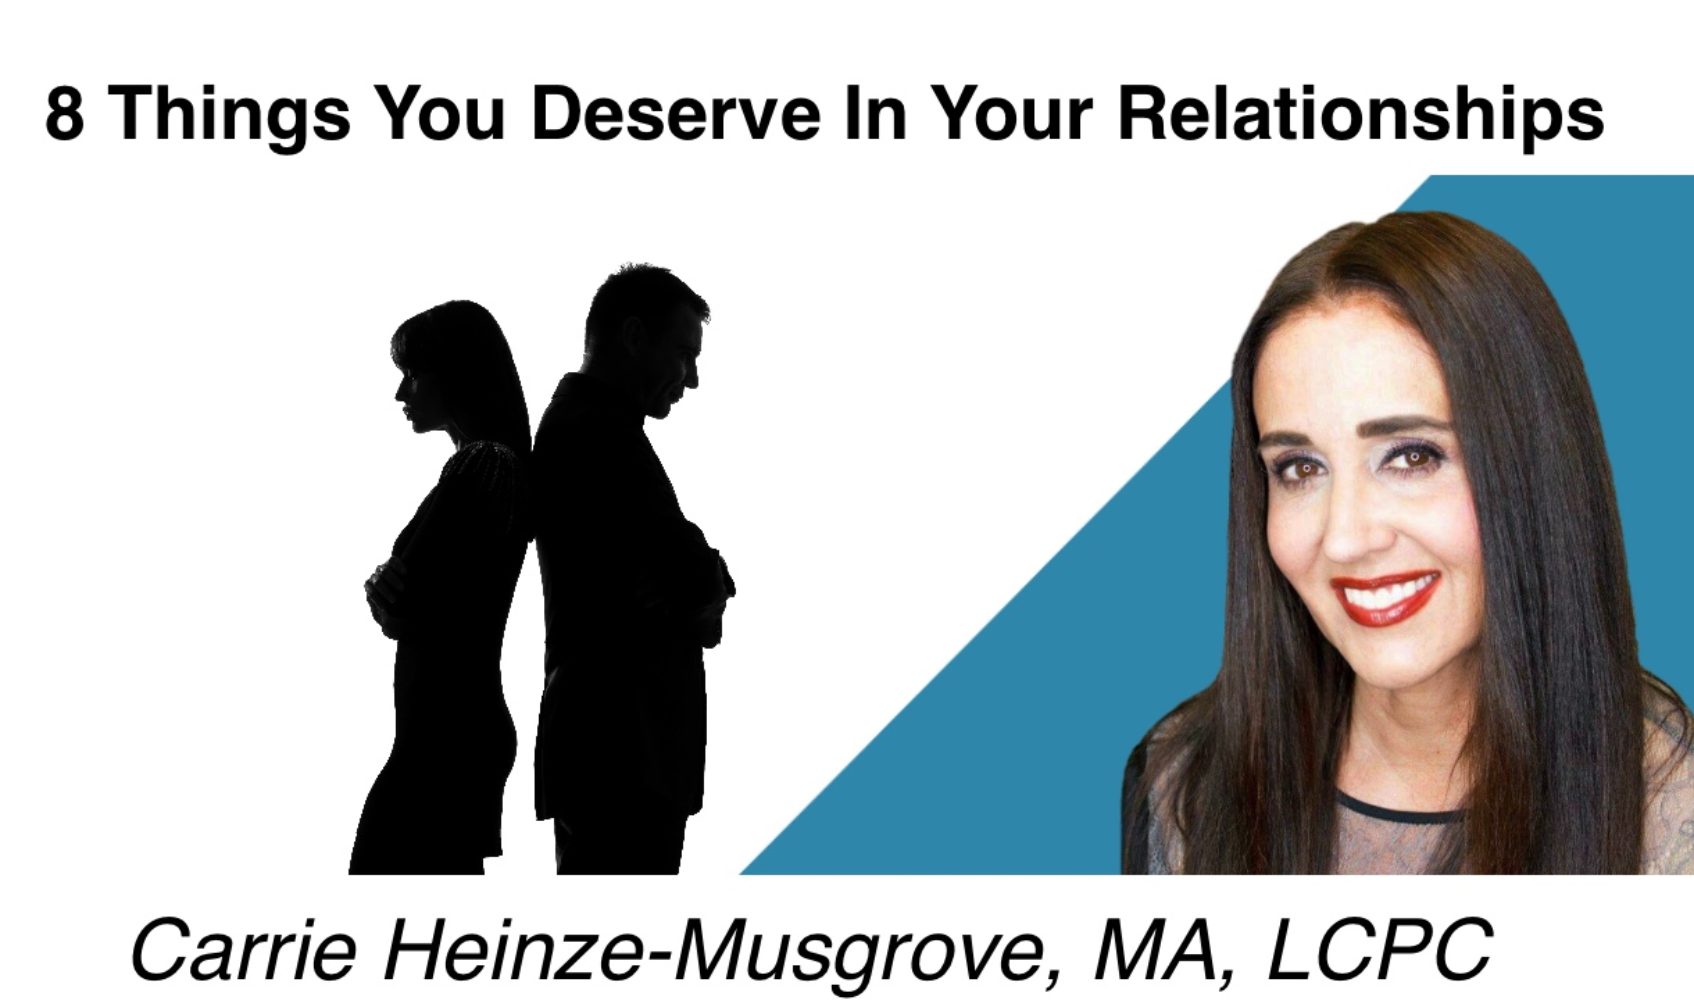 Sign up for my newsletter and get my booklet “8 Things You Deserve In Your Relationships” free.